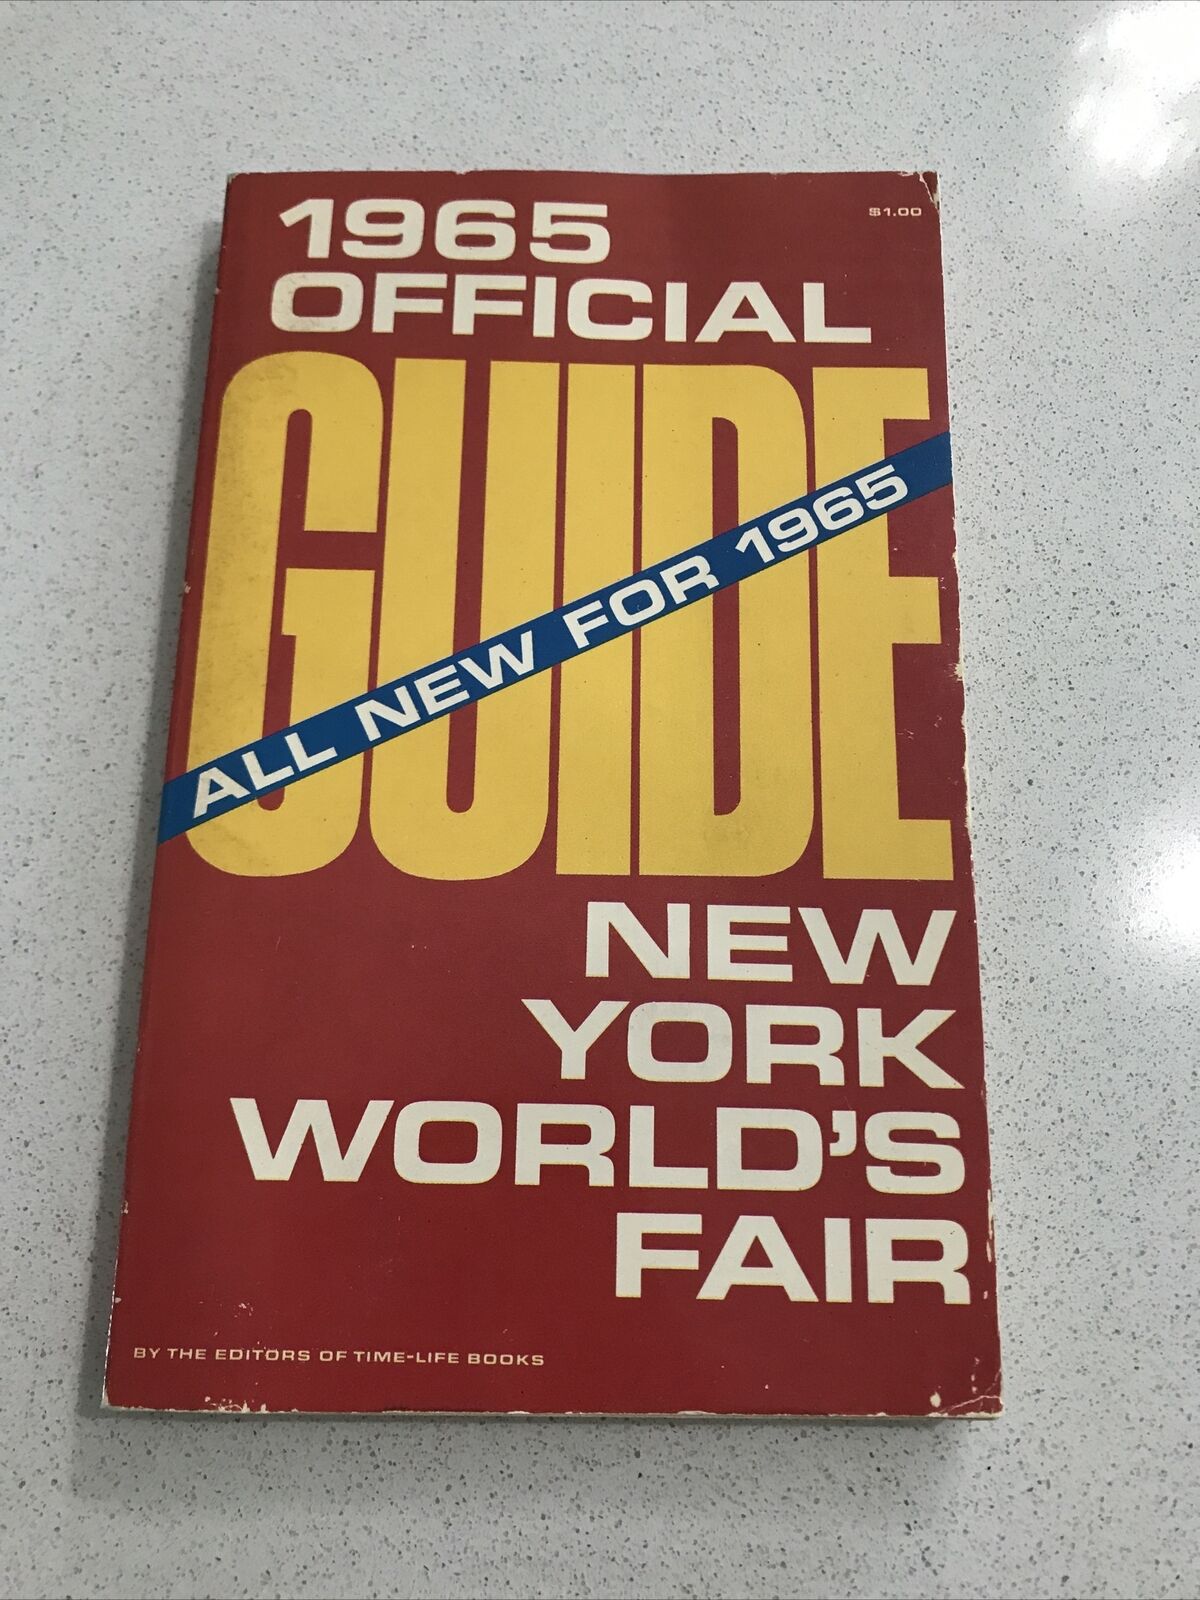 1965 All New Official Guide New York World’s Fair Time-Life Books